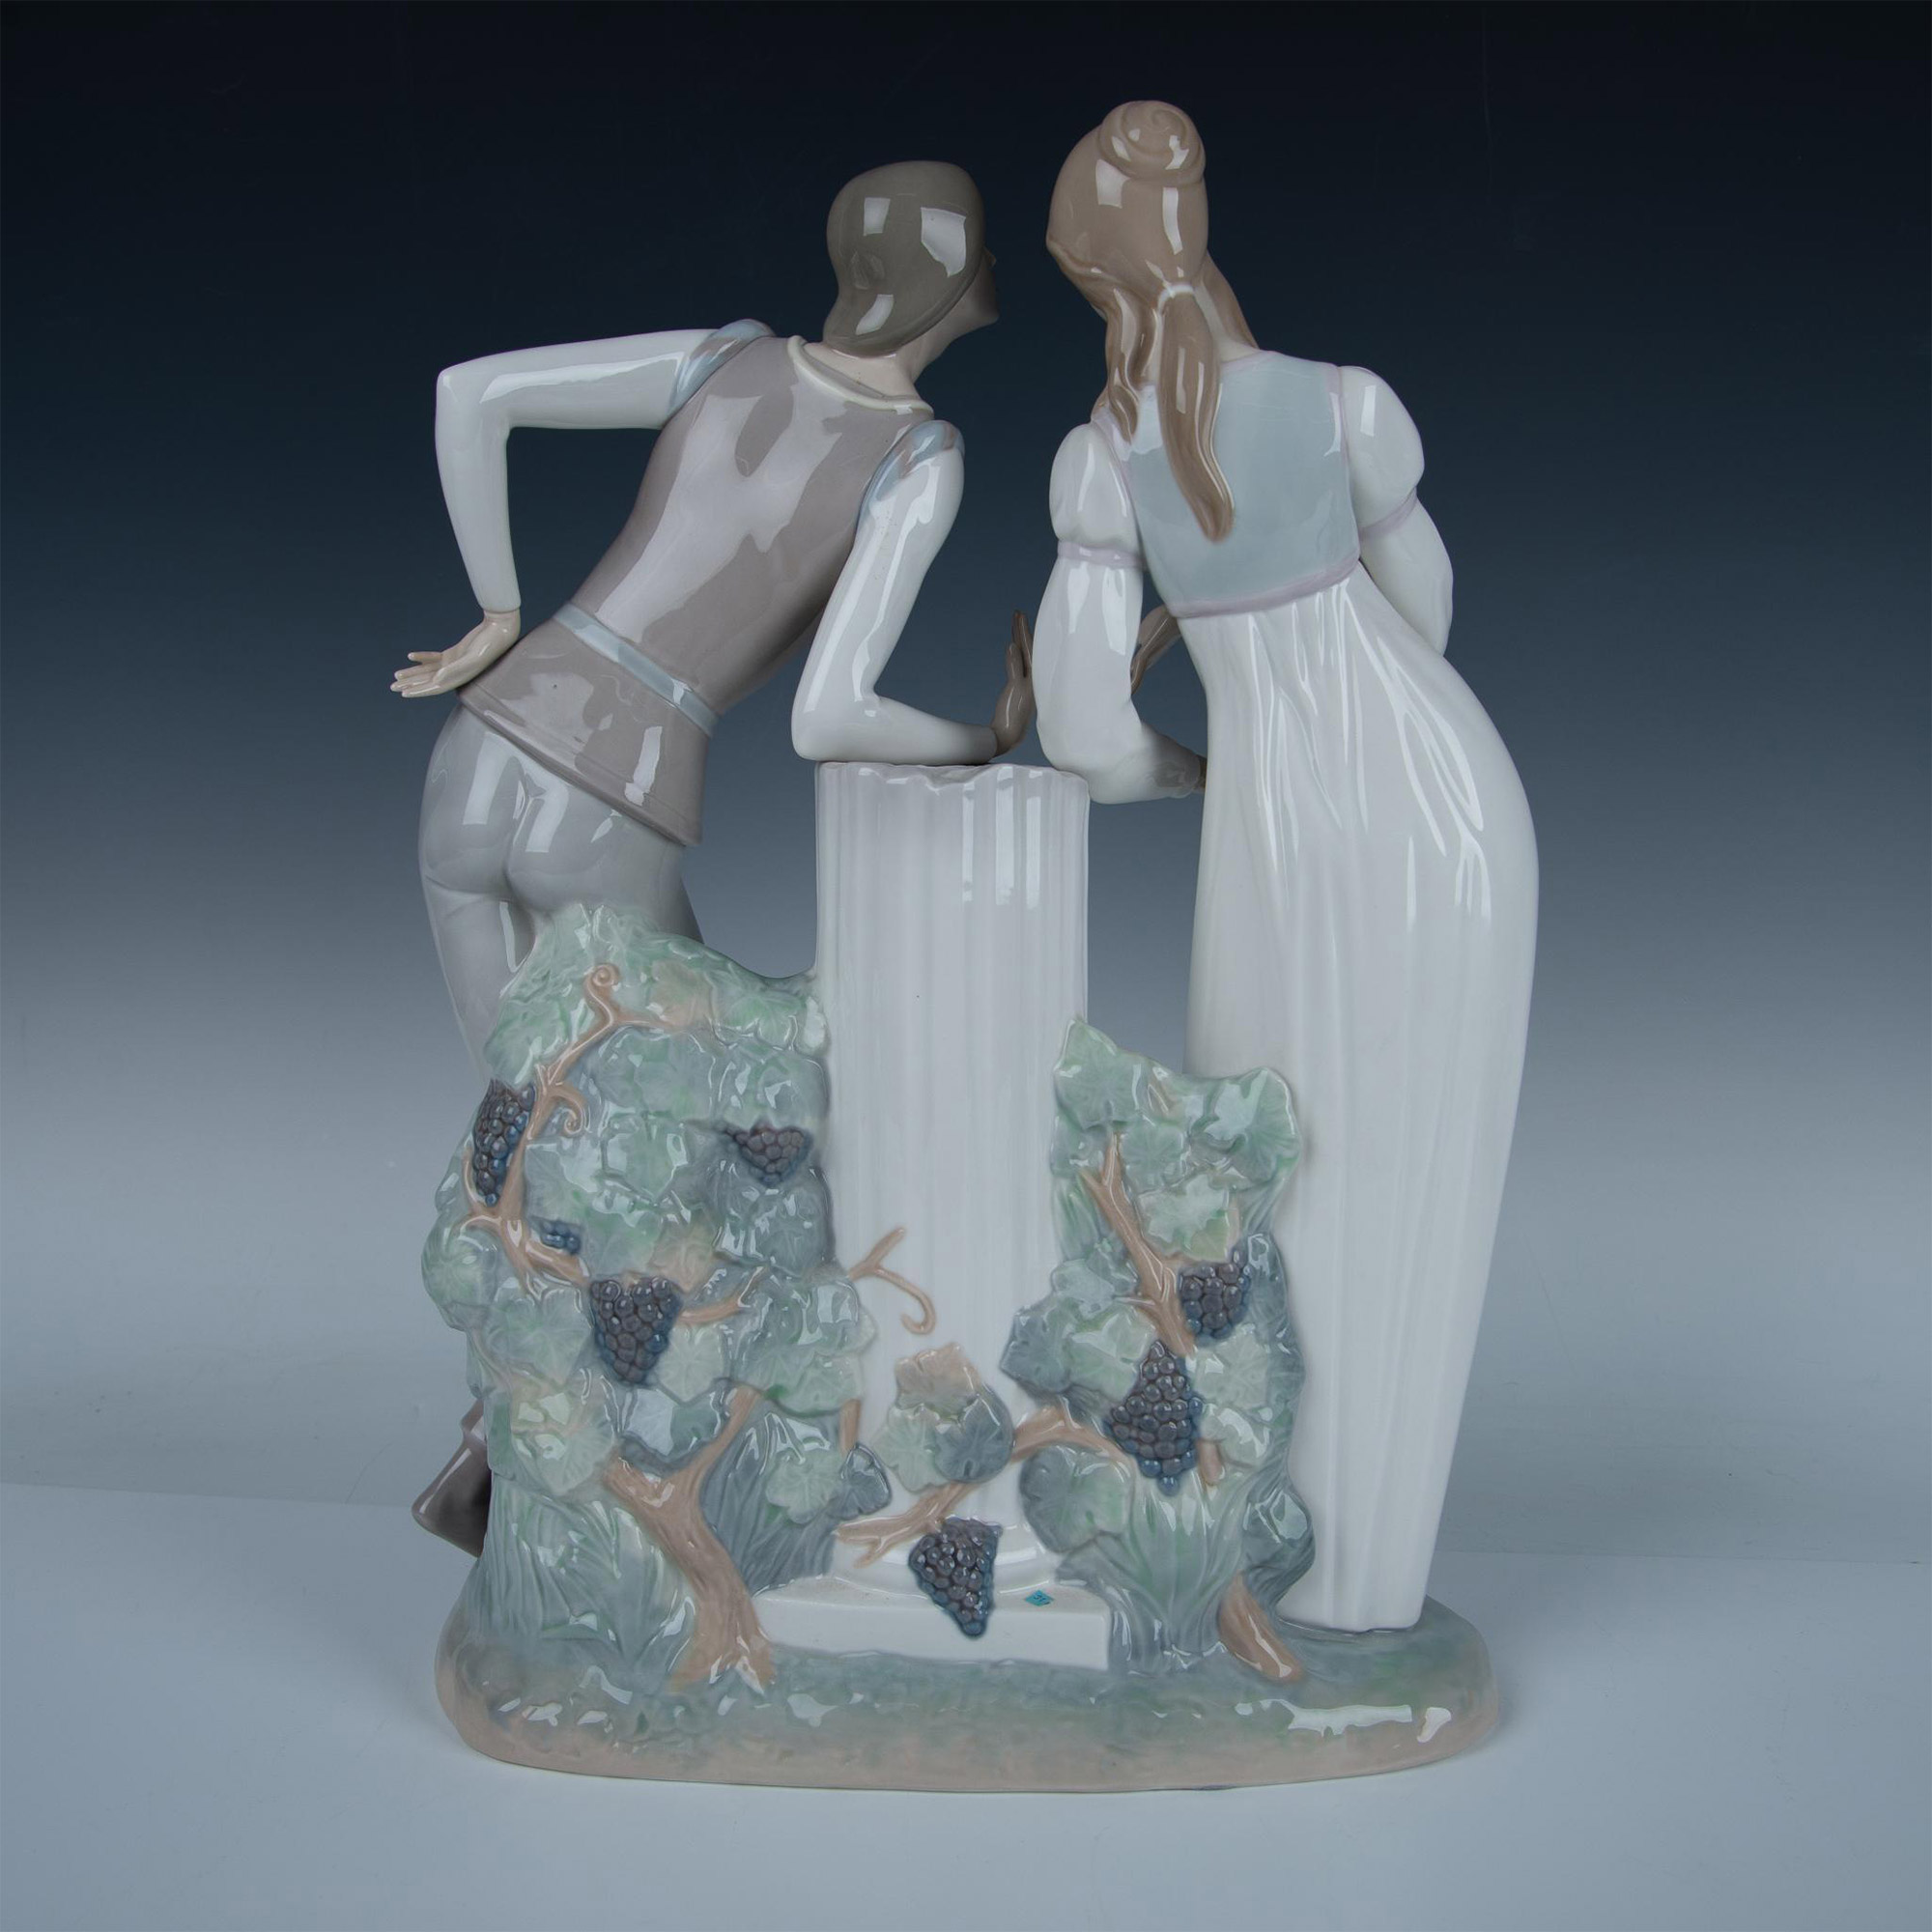 Romeo and Juliet 1004750 - Lladro Porcelain Figurine - Image 5 of 9